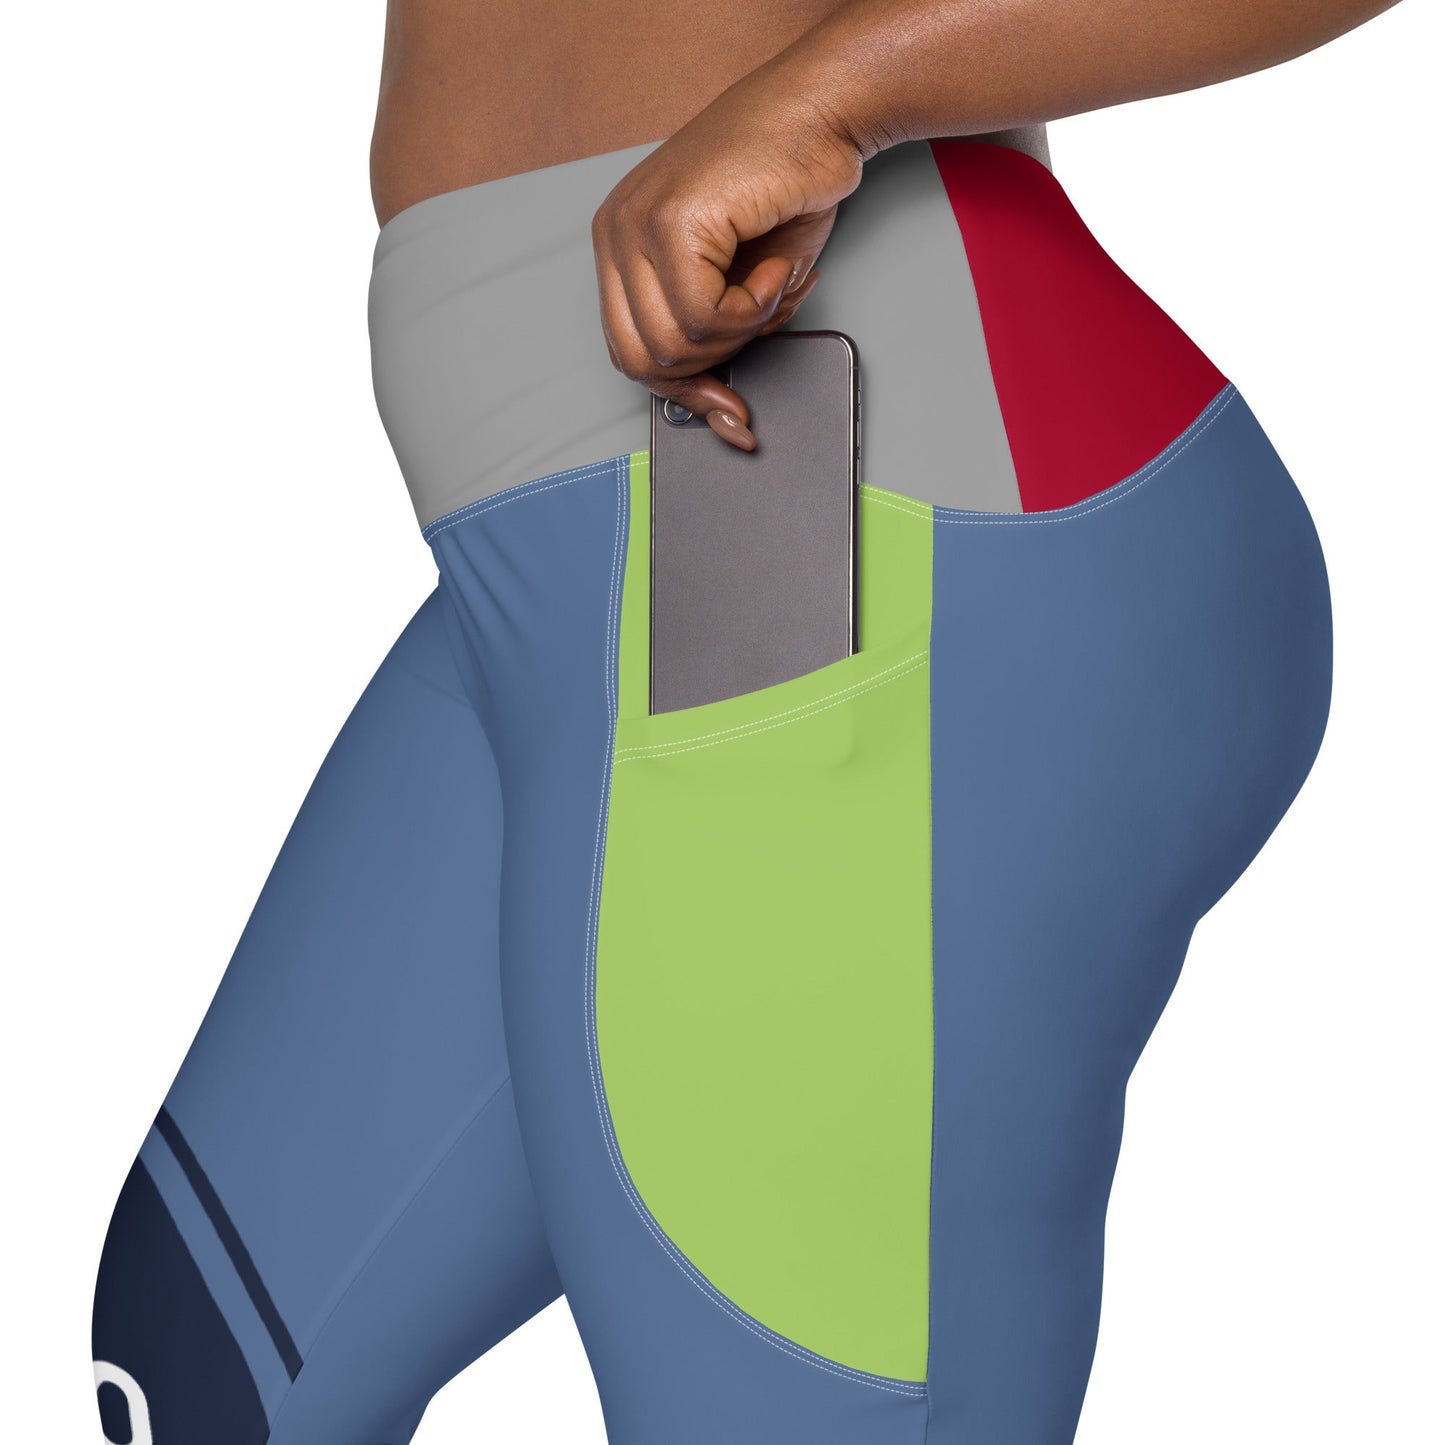 TIME OF VIBES - Leggings with pockets Demo CORPORATE - €59.00